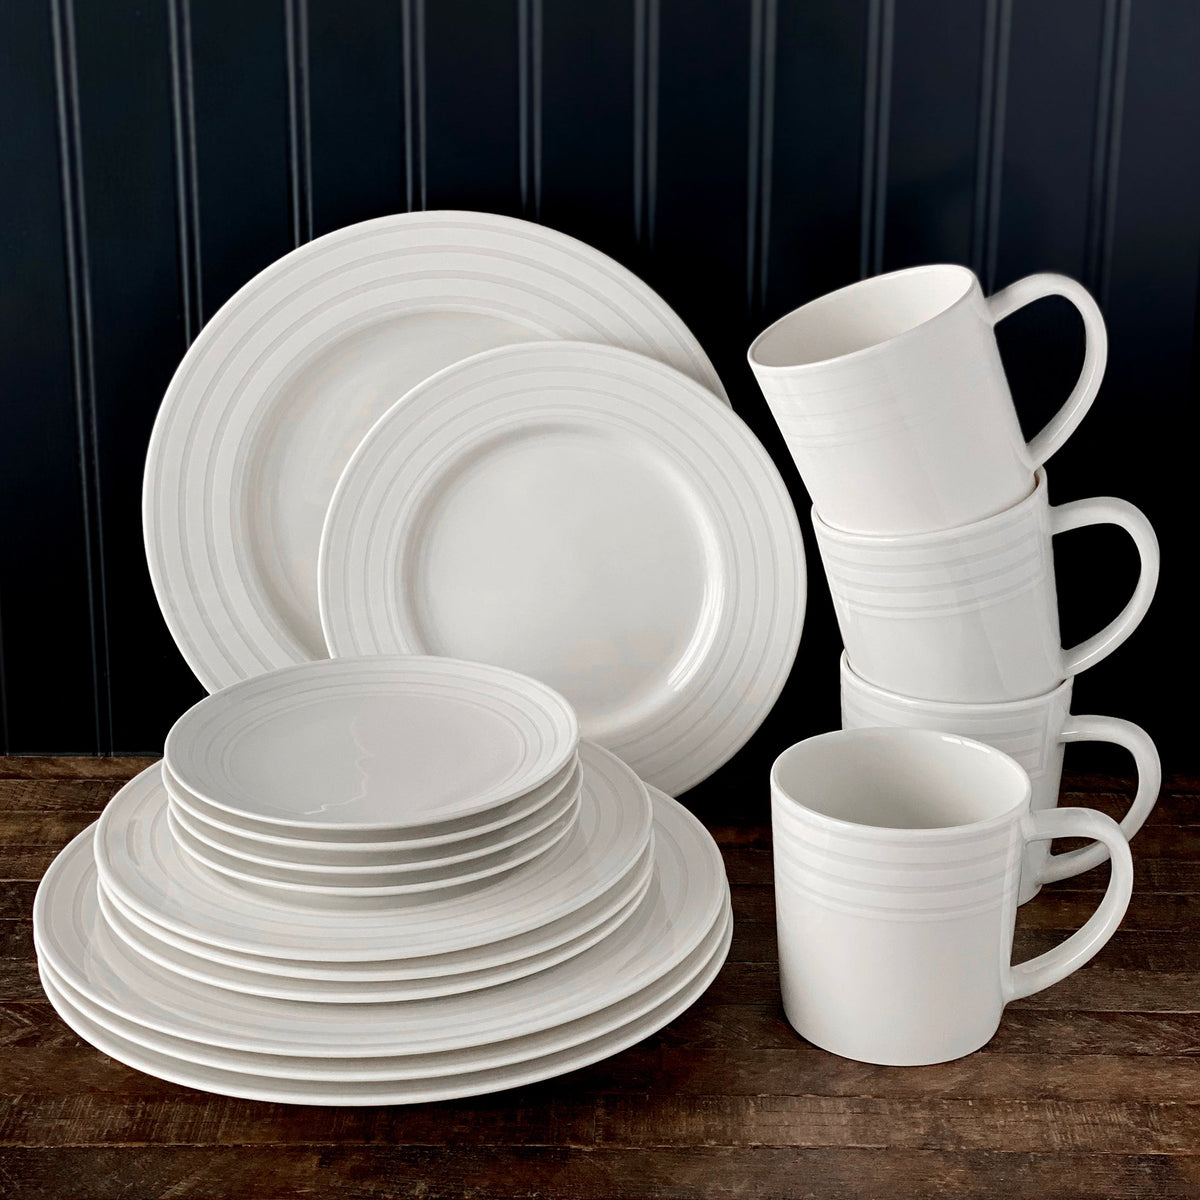 A set of Caskata Artisanal Home Cambridge Stripe Salad Plates, including a rimmed accent plate, on a wooden table.